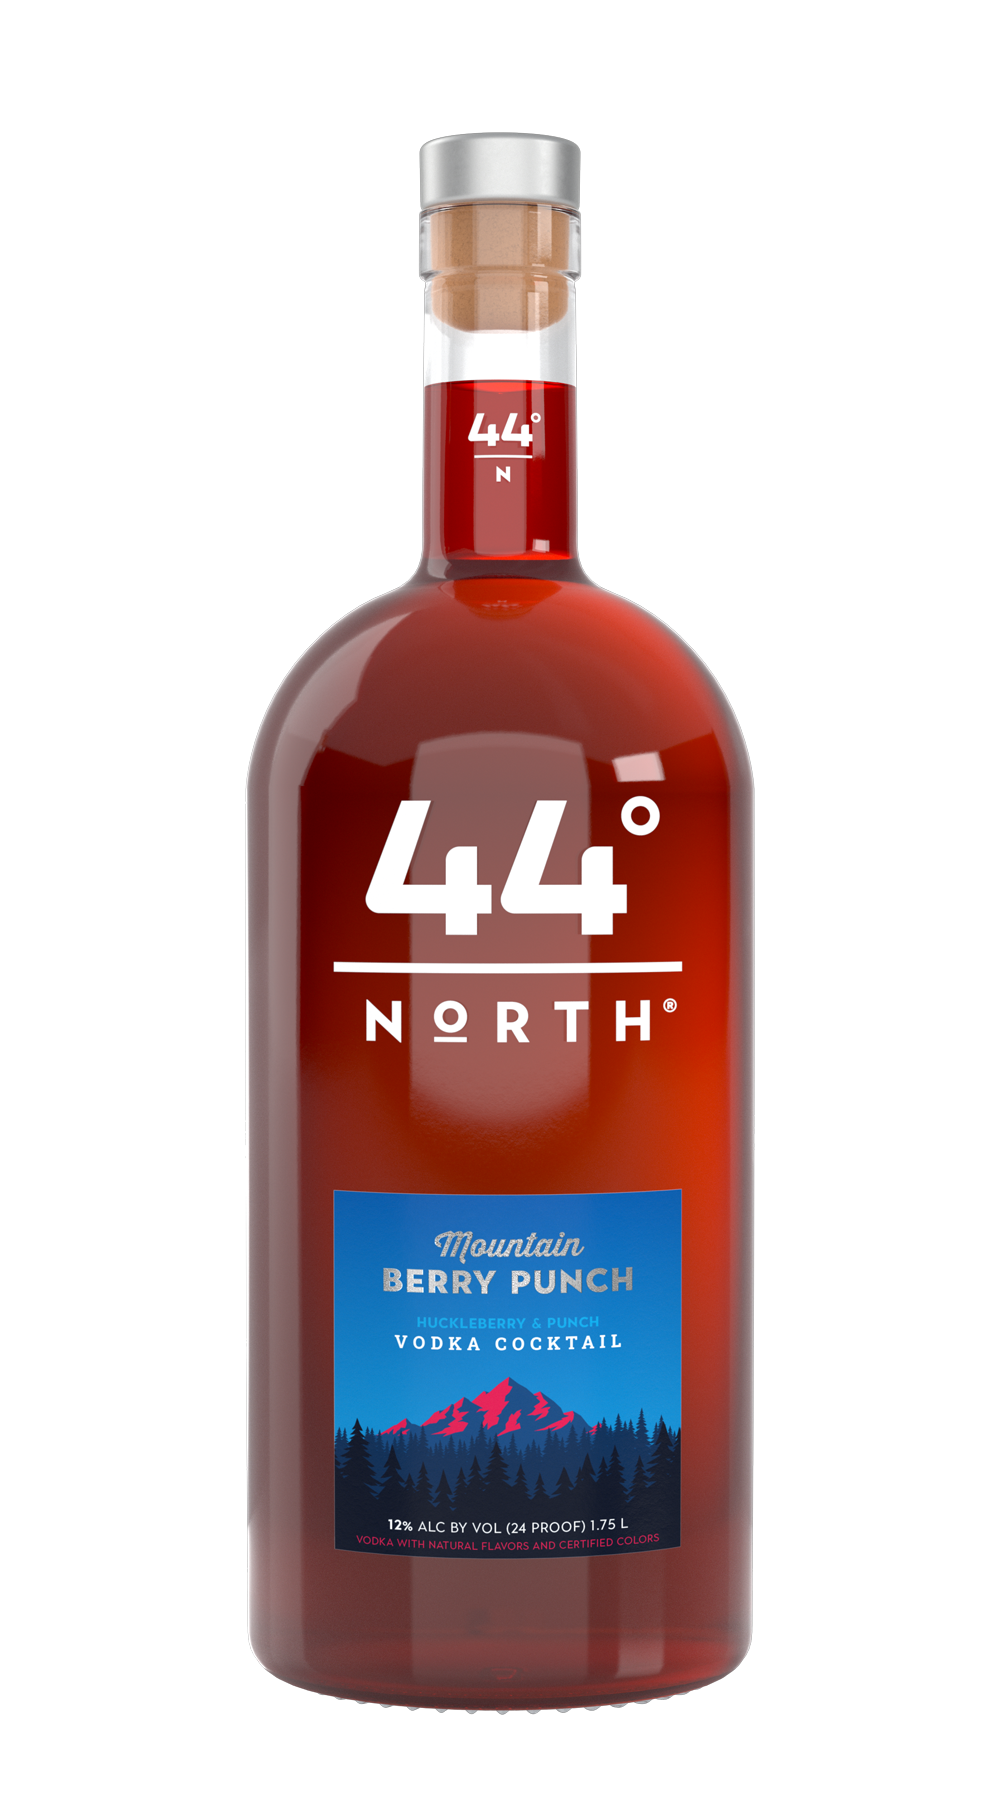 44° North® Mountain Berry Punch Vodka Cocktail